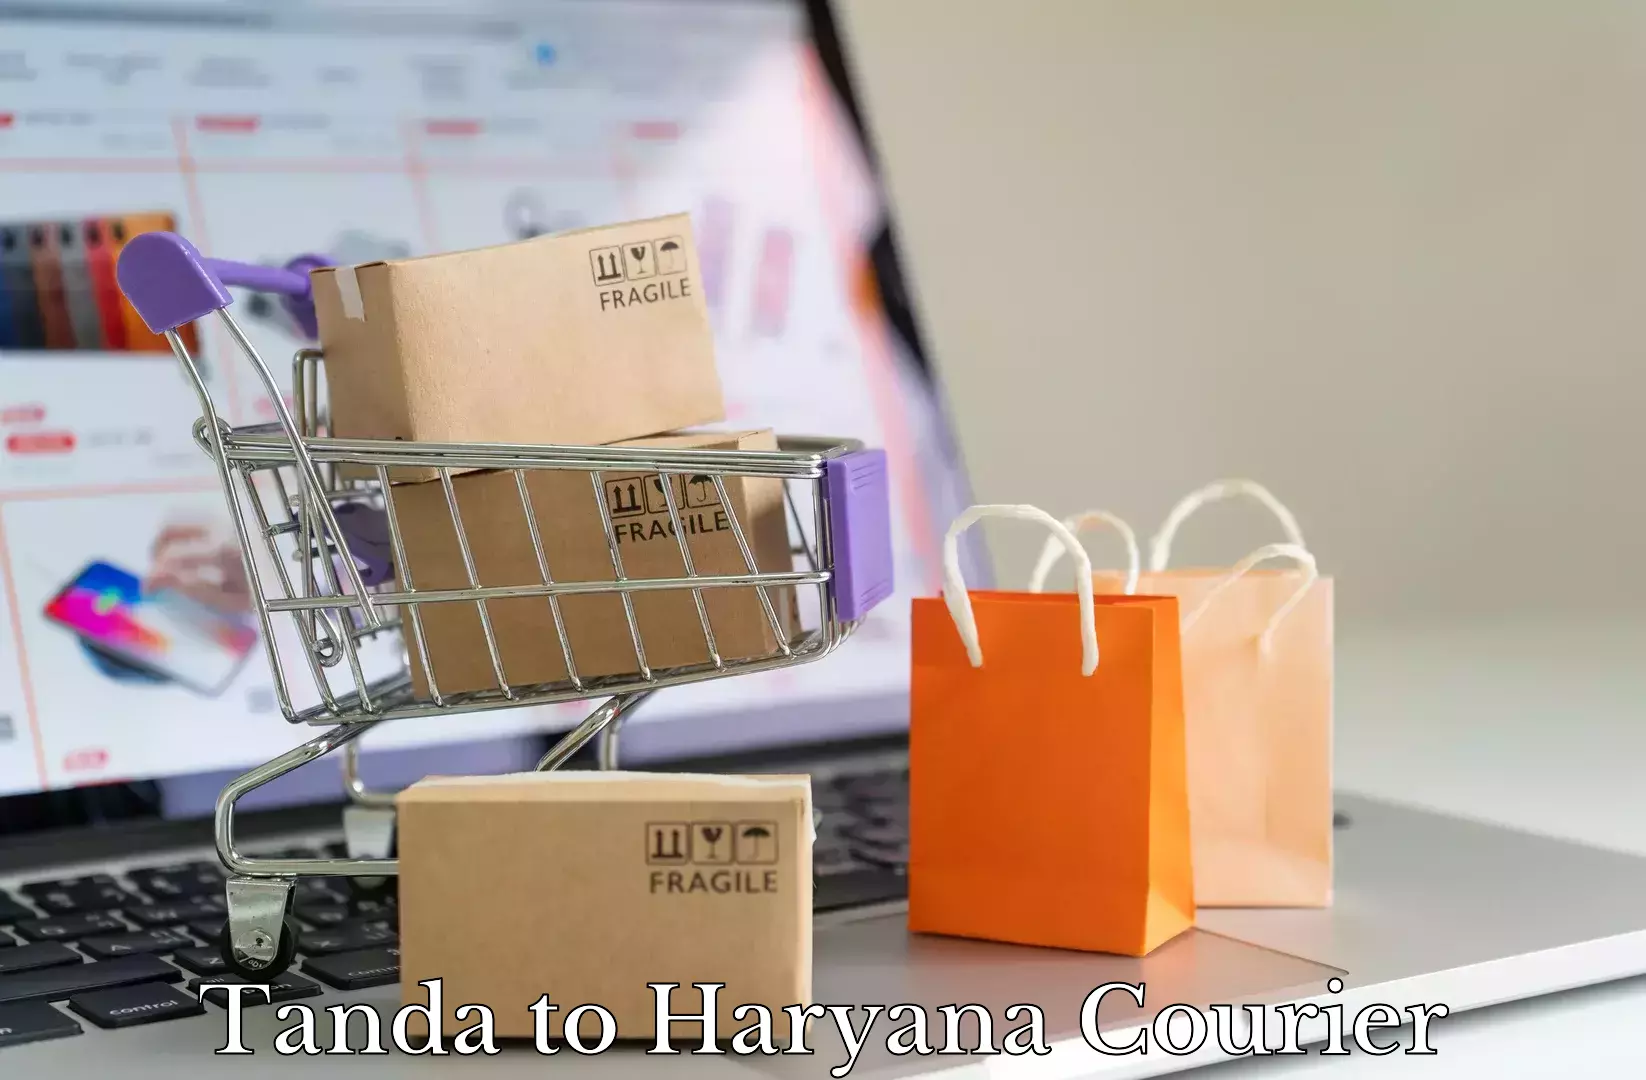 Furniture moving specialists Tanda to Haryana